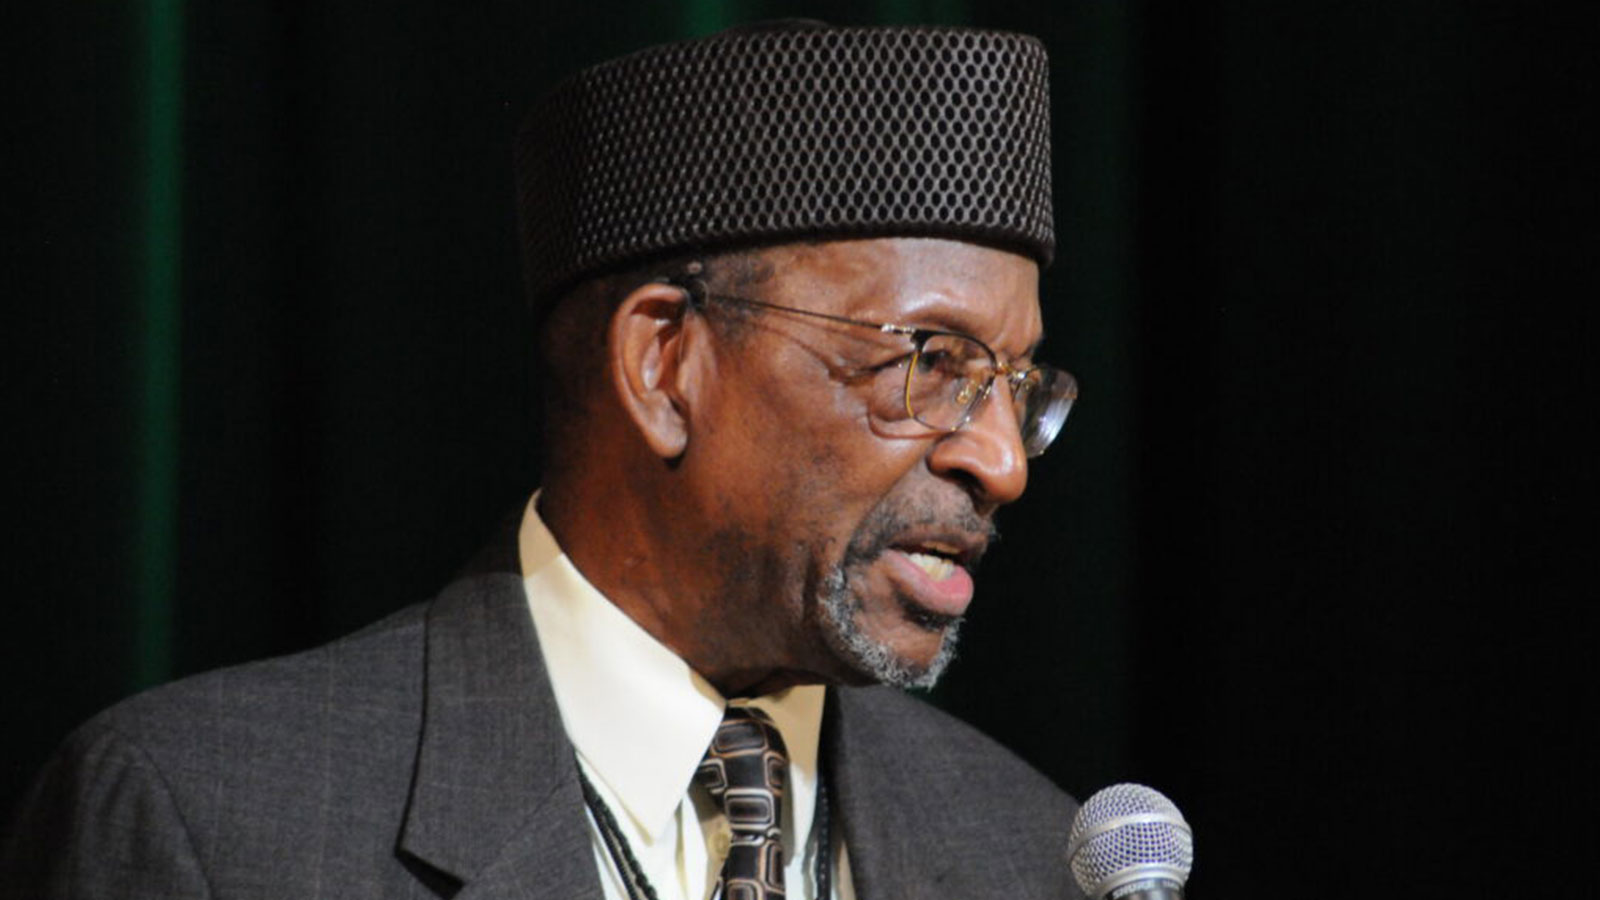 Dr. Ron Daniels, convener of the National African American Reparations Commission